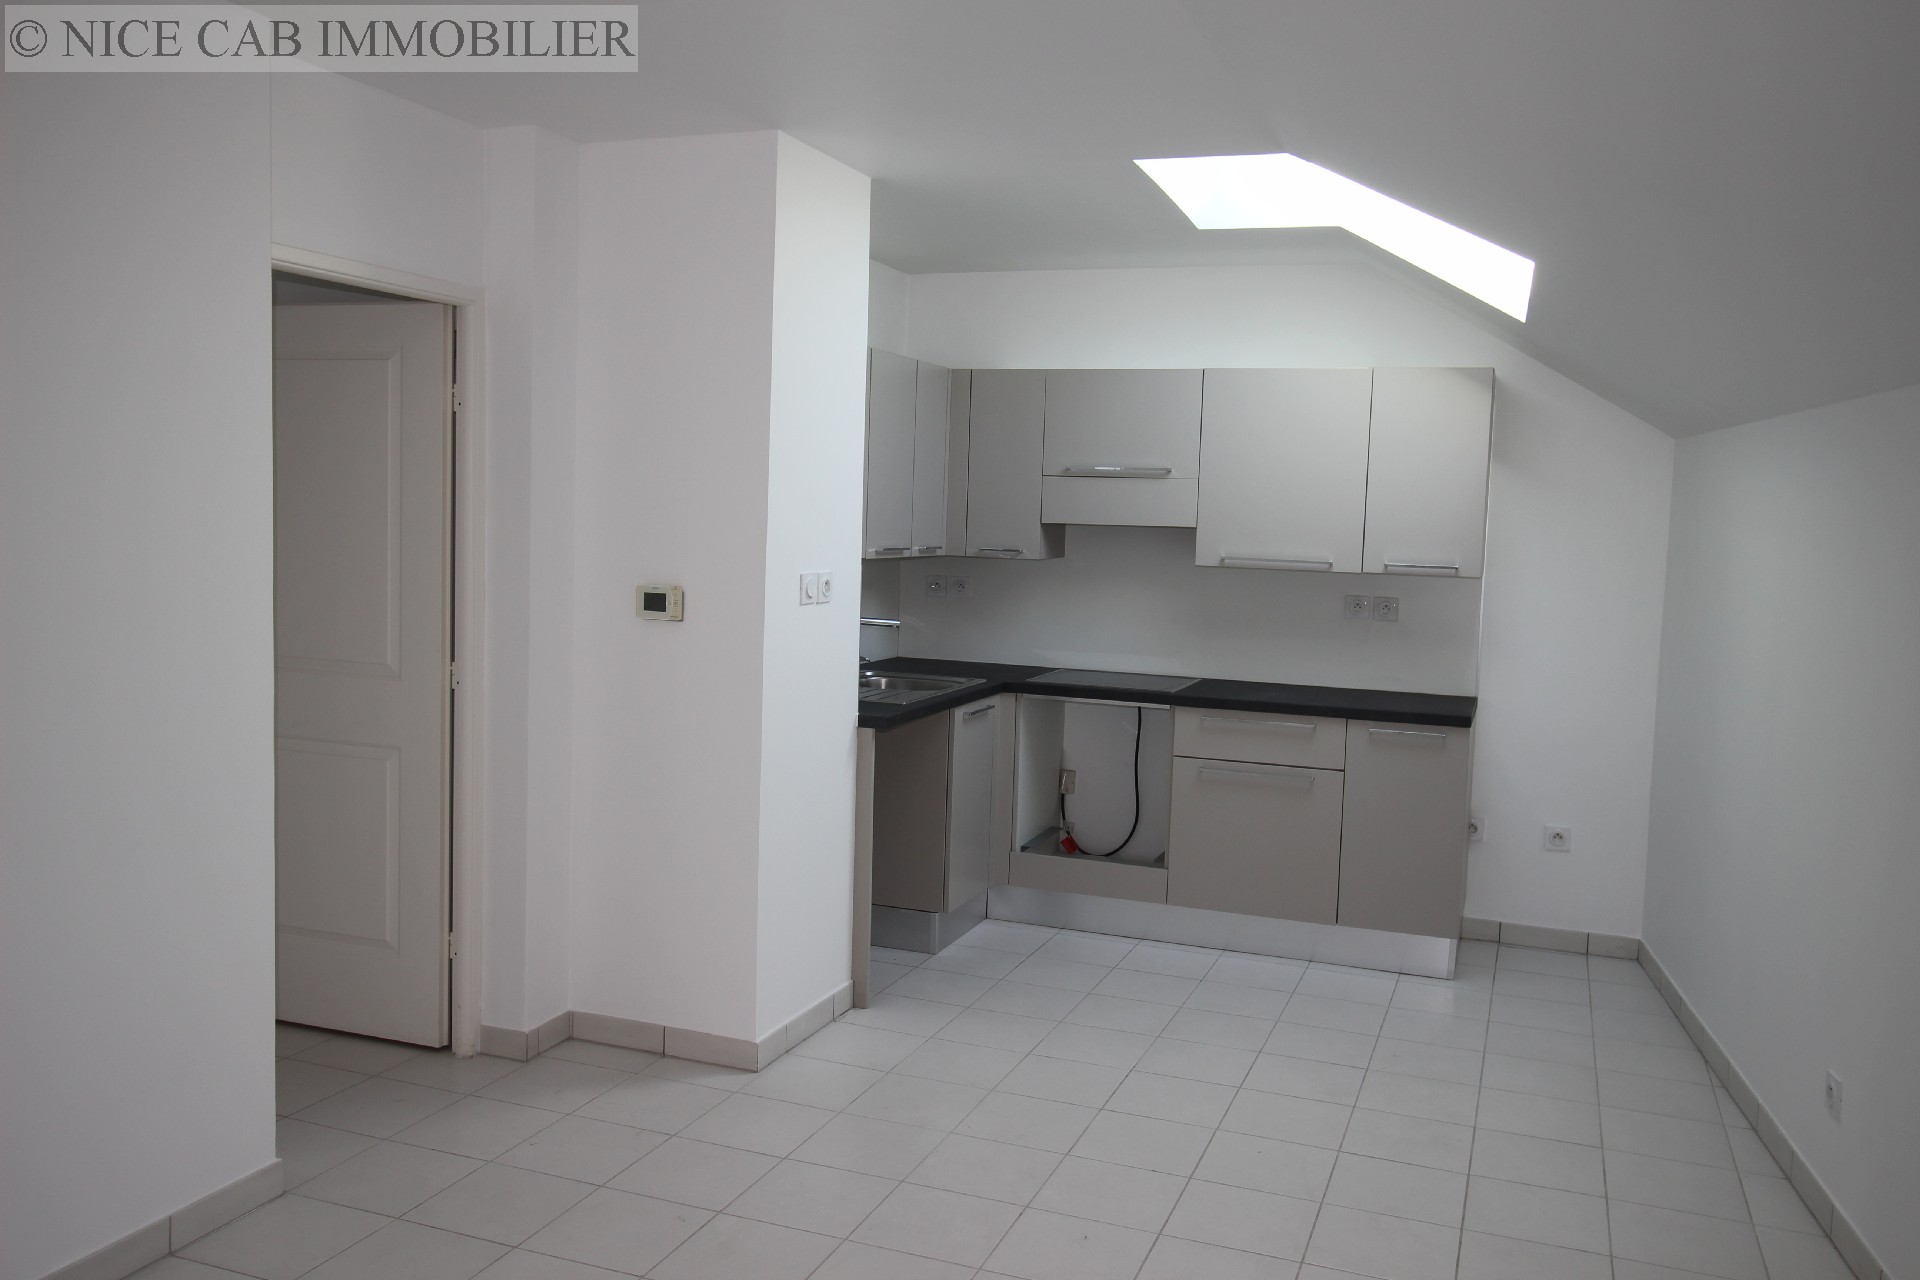 Apartment A property to buy, NICE, 45 m², 2 rooms